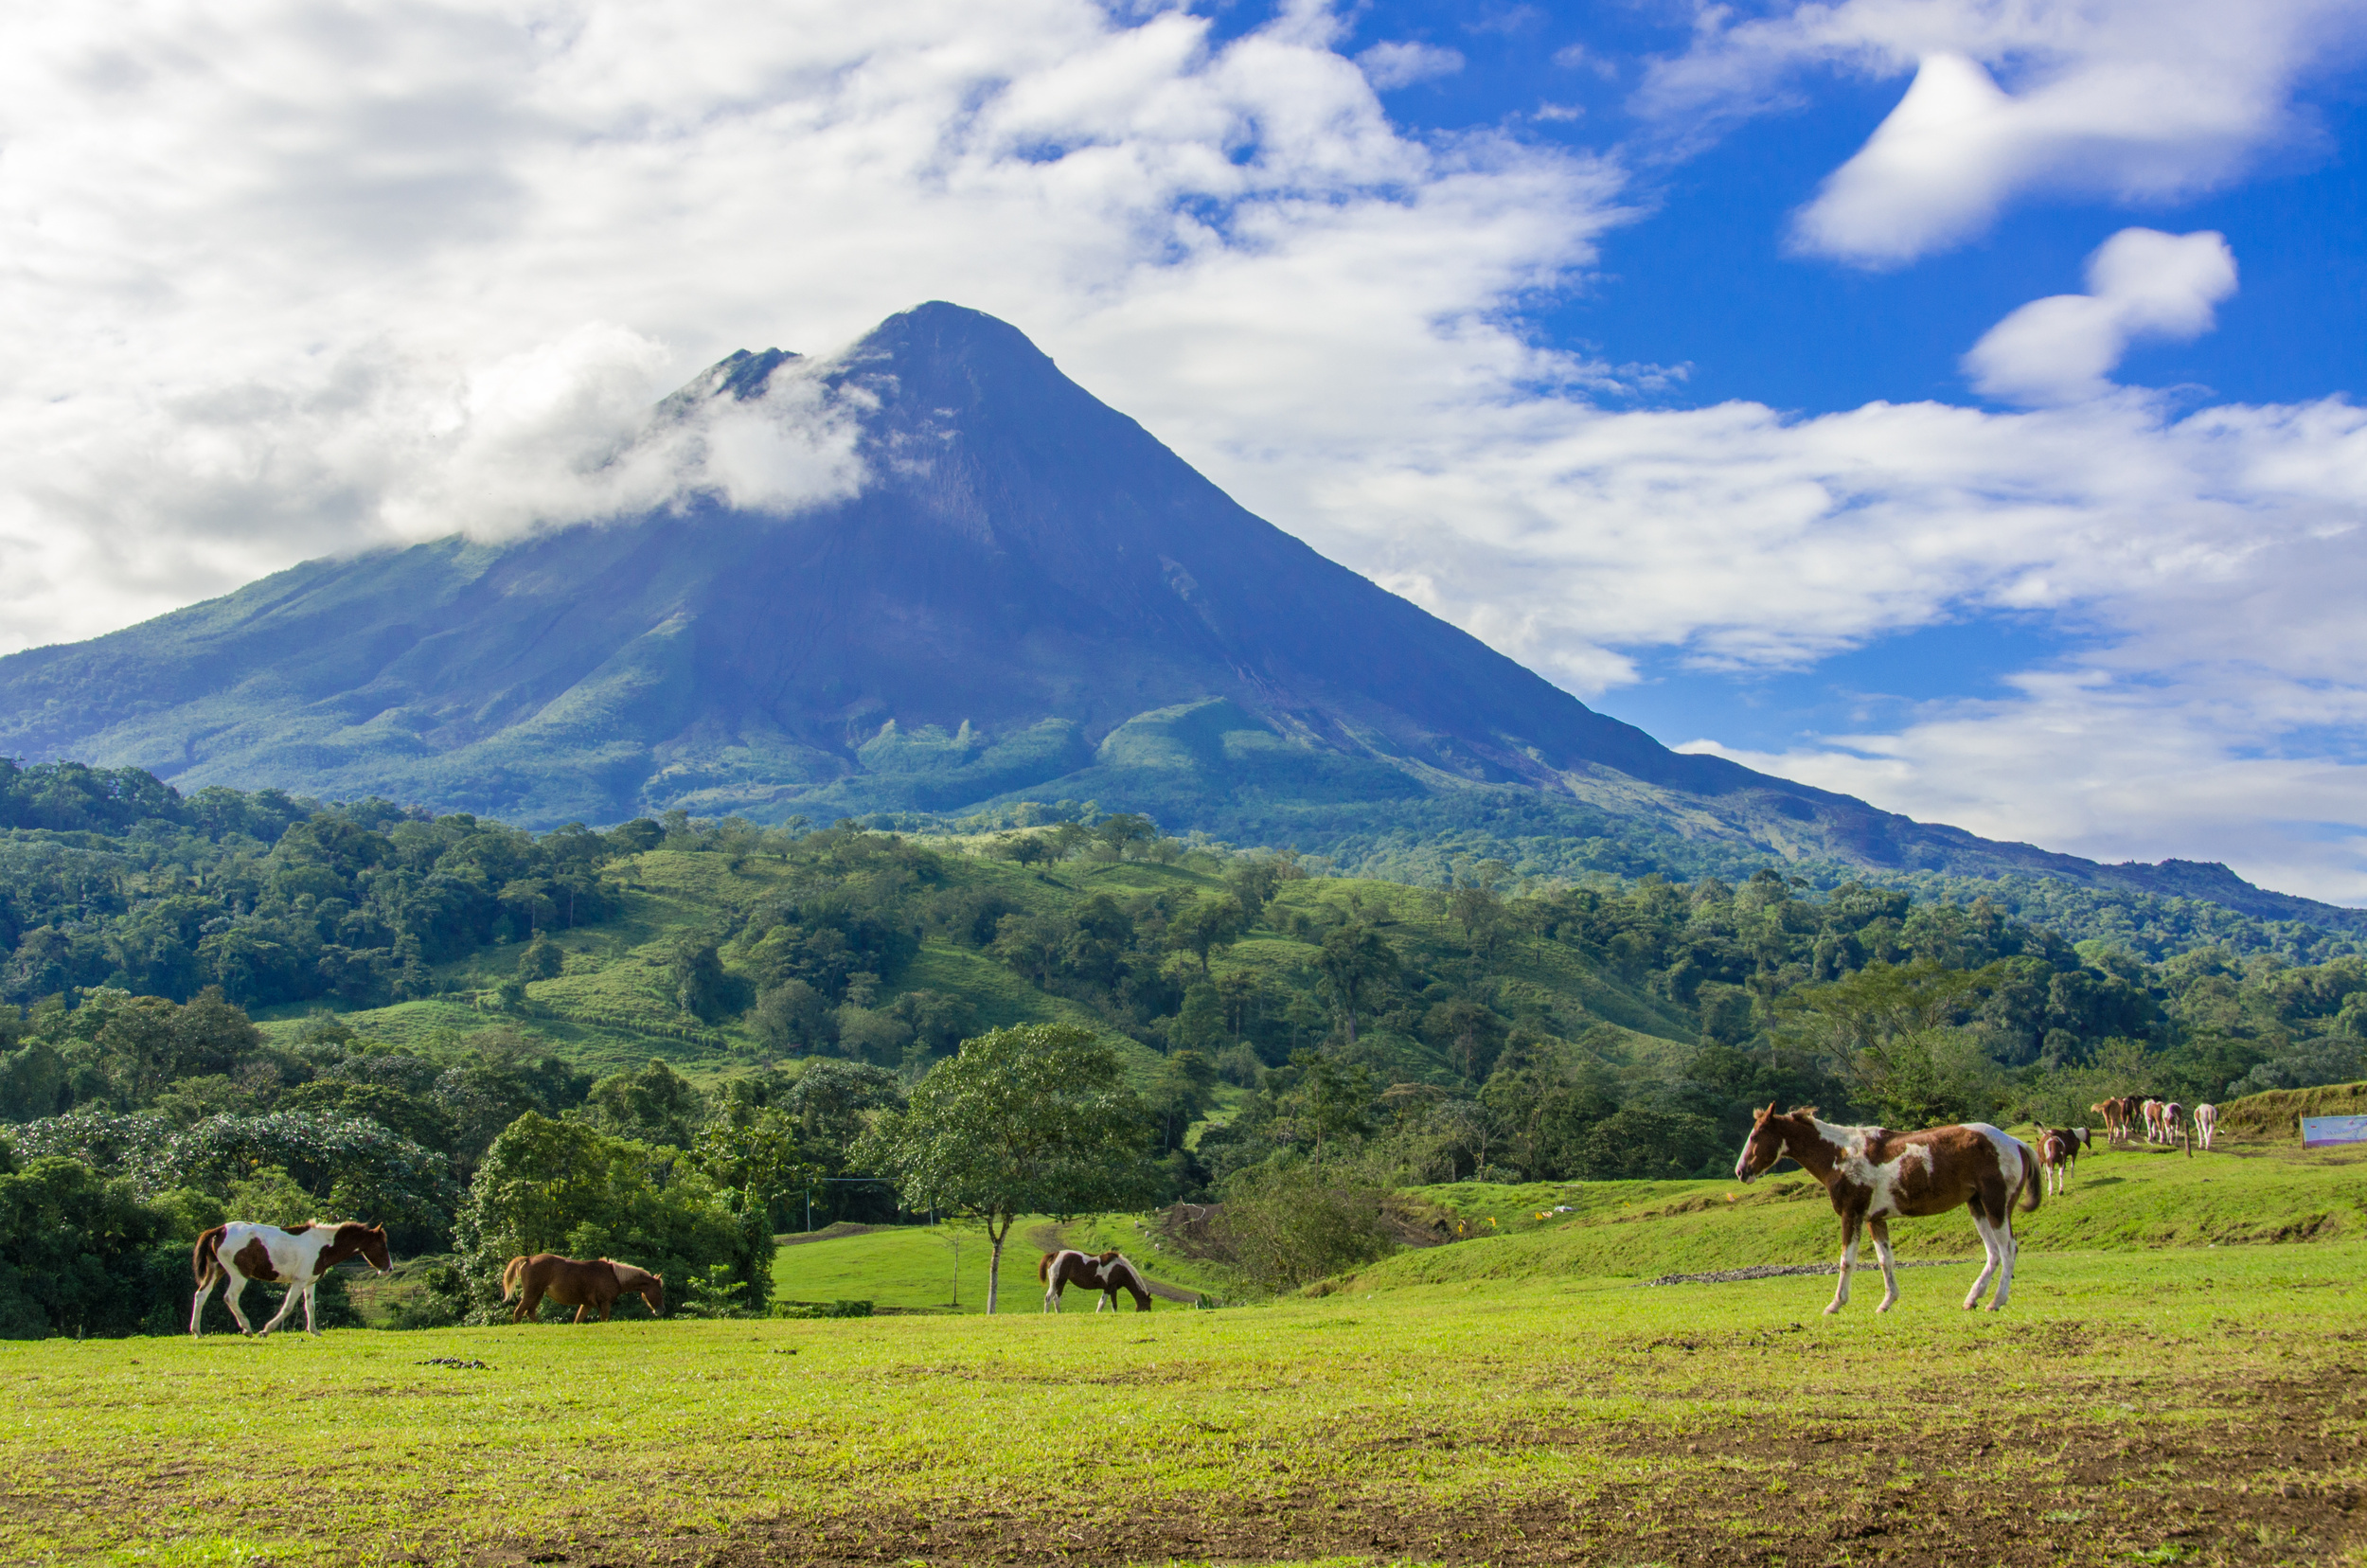 <p>Costa Rica has no shortage of amazing scenery; from volcanoes to endless beaches and staggering mountains, there’s something for everyone here. And one of the best ways to see it all is on a trail ride. Numerous ranches offer day and overnight experiences throughout the country.</p><p><a href='https://www.msn.com/en-us/community/channel/vid-cj9pqbr0vn9in2b6ddcd8sfgpfq6x6utp44fssrv6mc2gtybw0us'>Follow us on MSN to see more of our exclusive lifestyle content.</a></p>